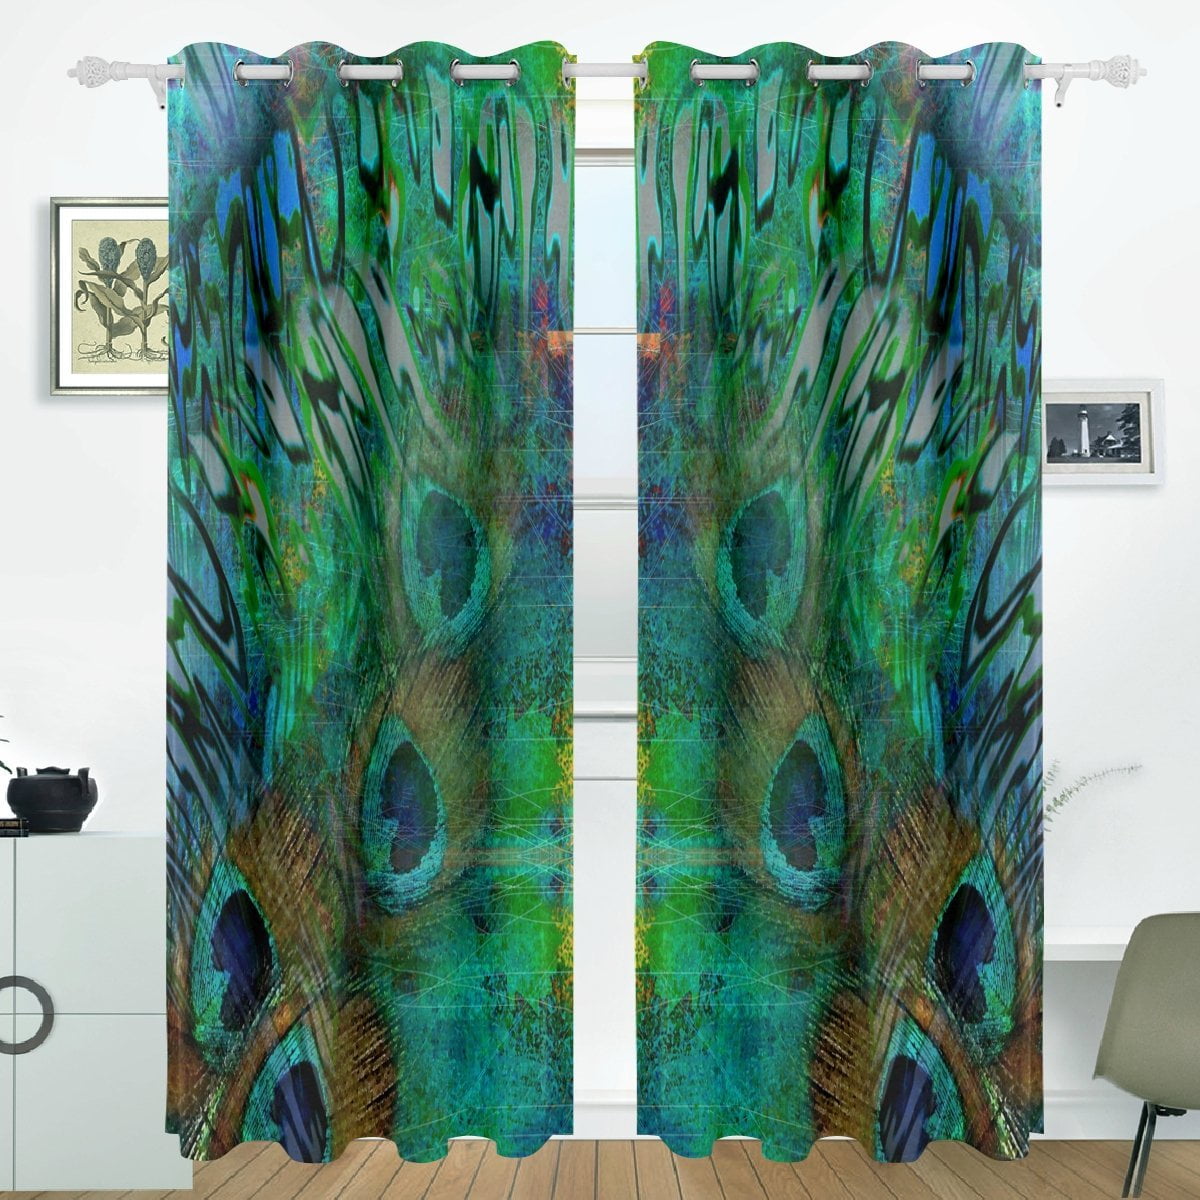 Dolphin Curtains Aqua Show Photography Window Drapes 2 Panel Set 108x84 Inches 